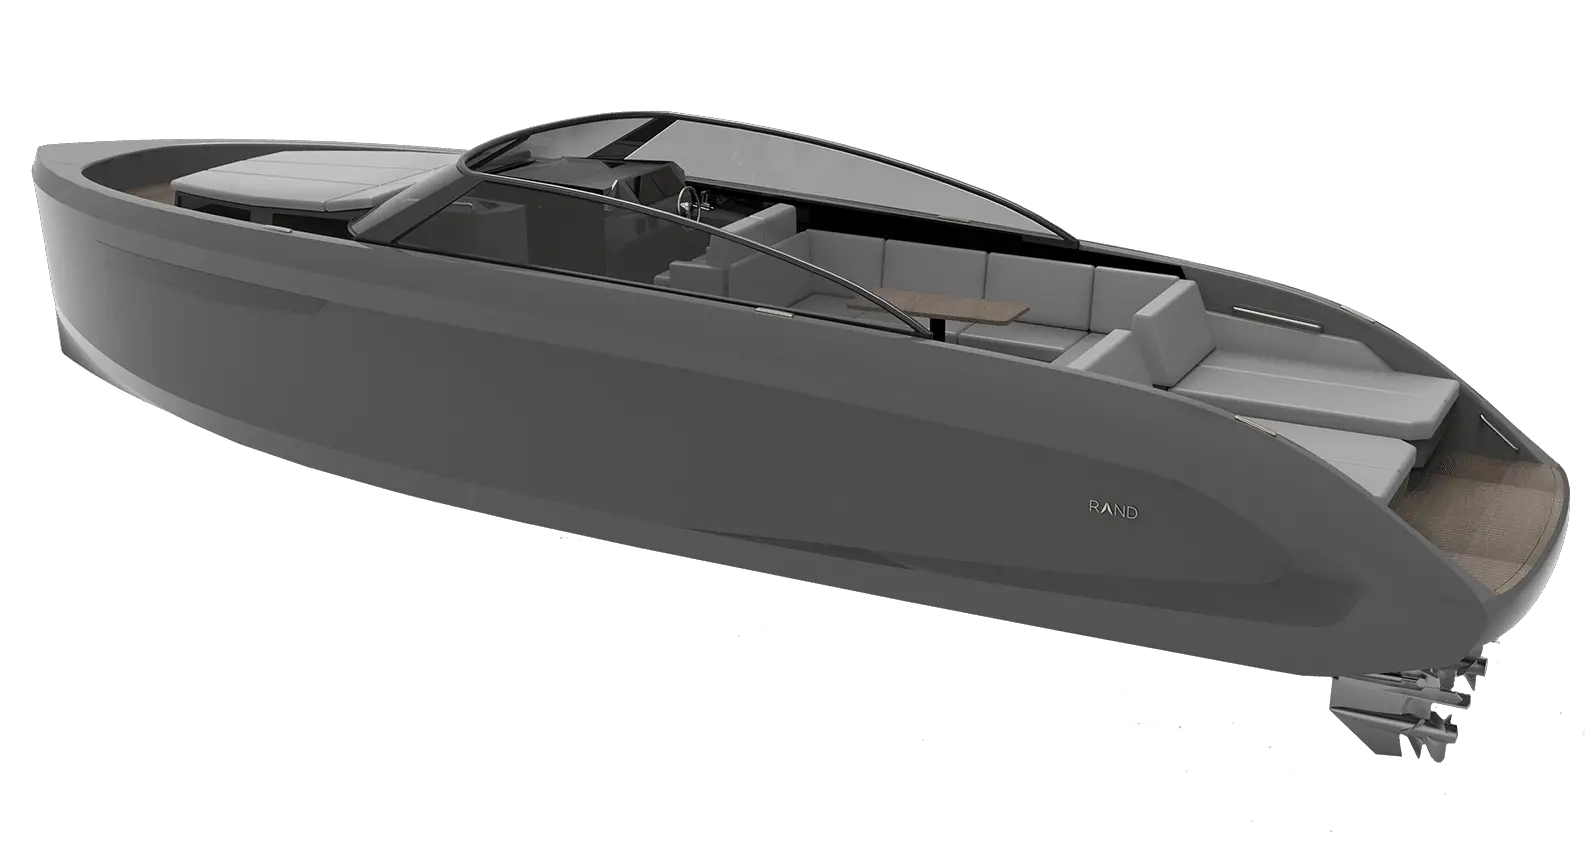 Download Rand Boats Yacht Series Rand Boats Png Yacht Png